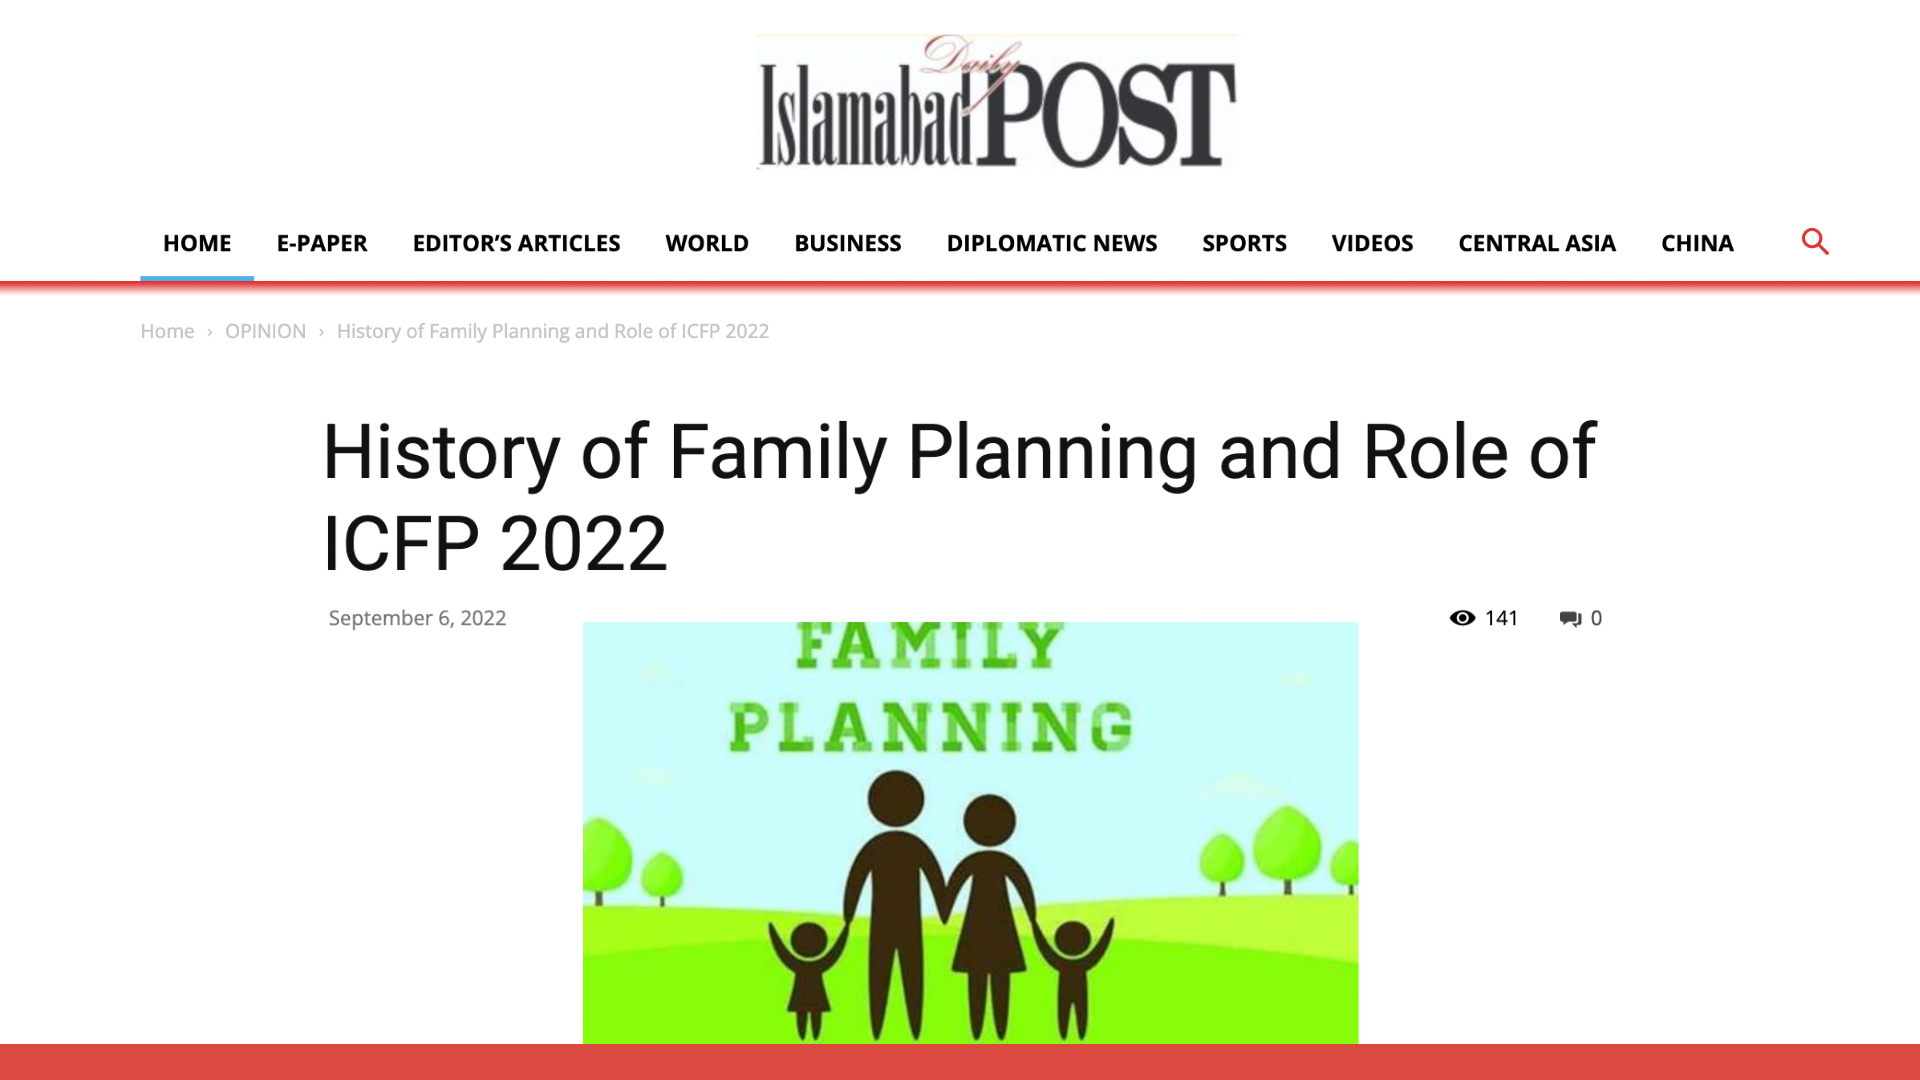 History of Family Planning and Role of ICFP 2022